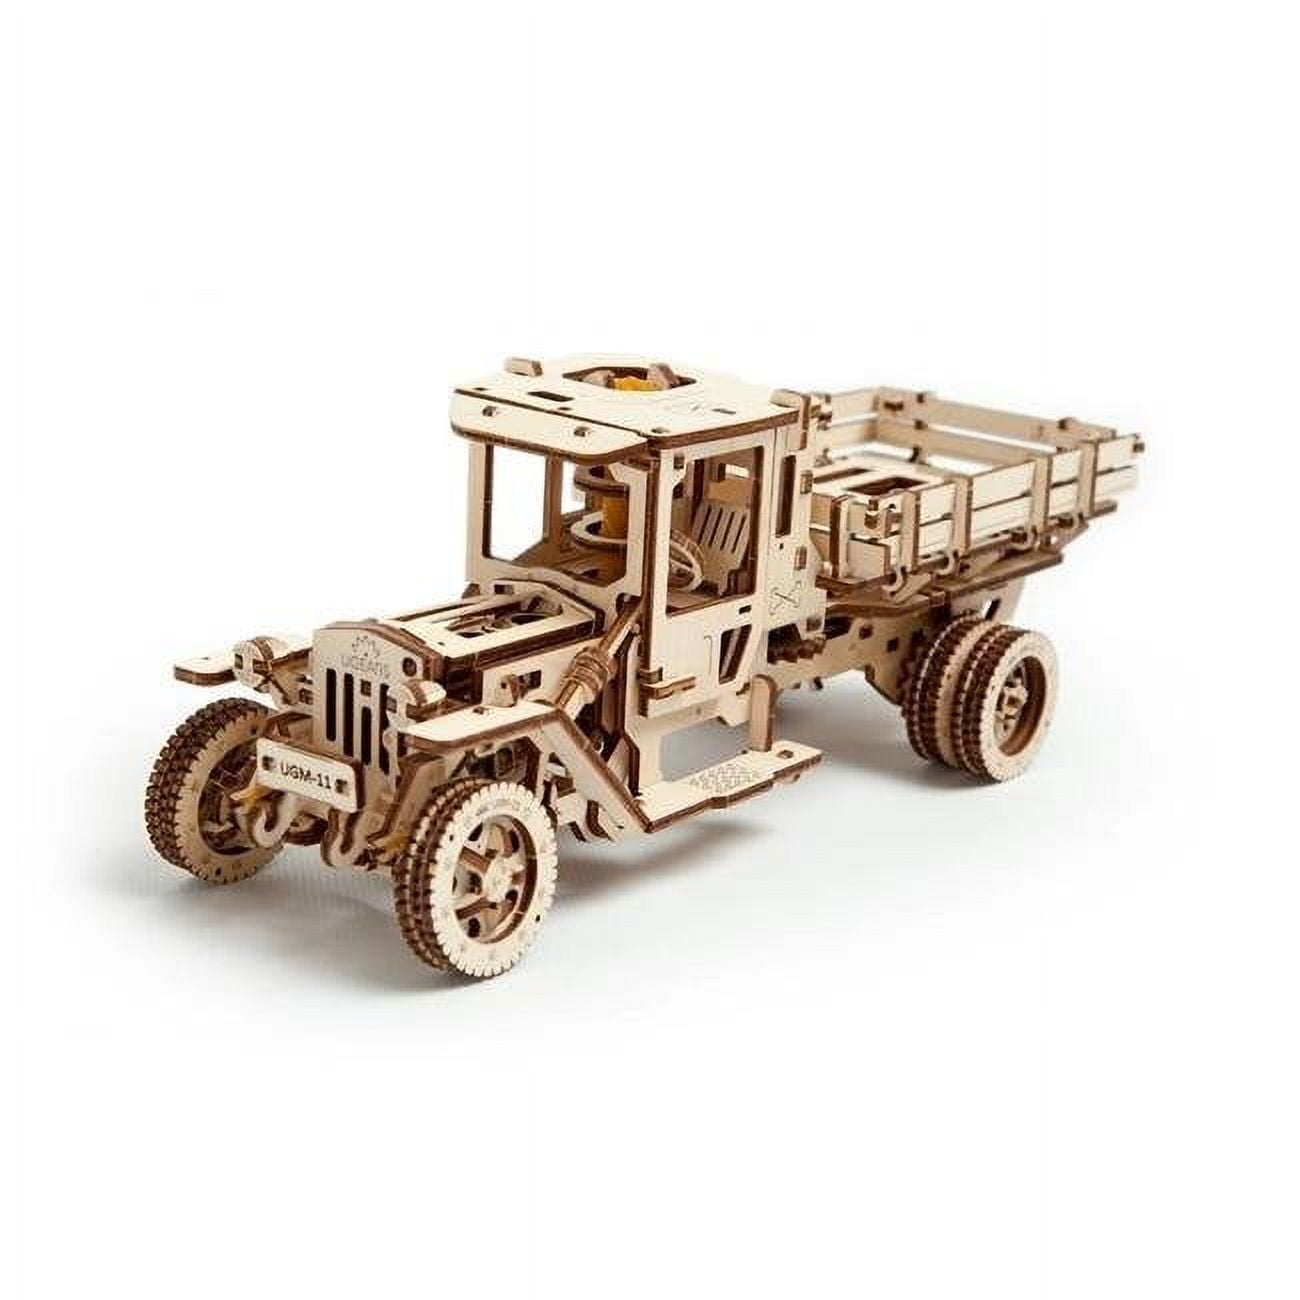 S&S Worldwide Wood Transportation Model Kit, Unfinished, Unassembled, Asst.  Vehicles, Precut Craft Wood & DIY Instructions, Wood Glue (not included),  Finished Sizes 5-1/2 to 9 long. Makes 12. 